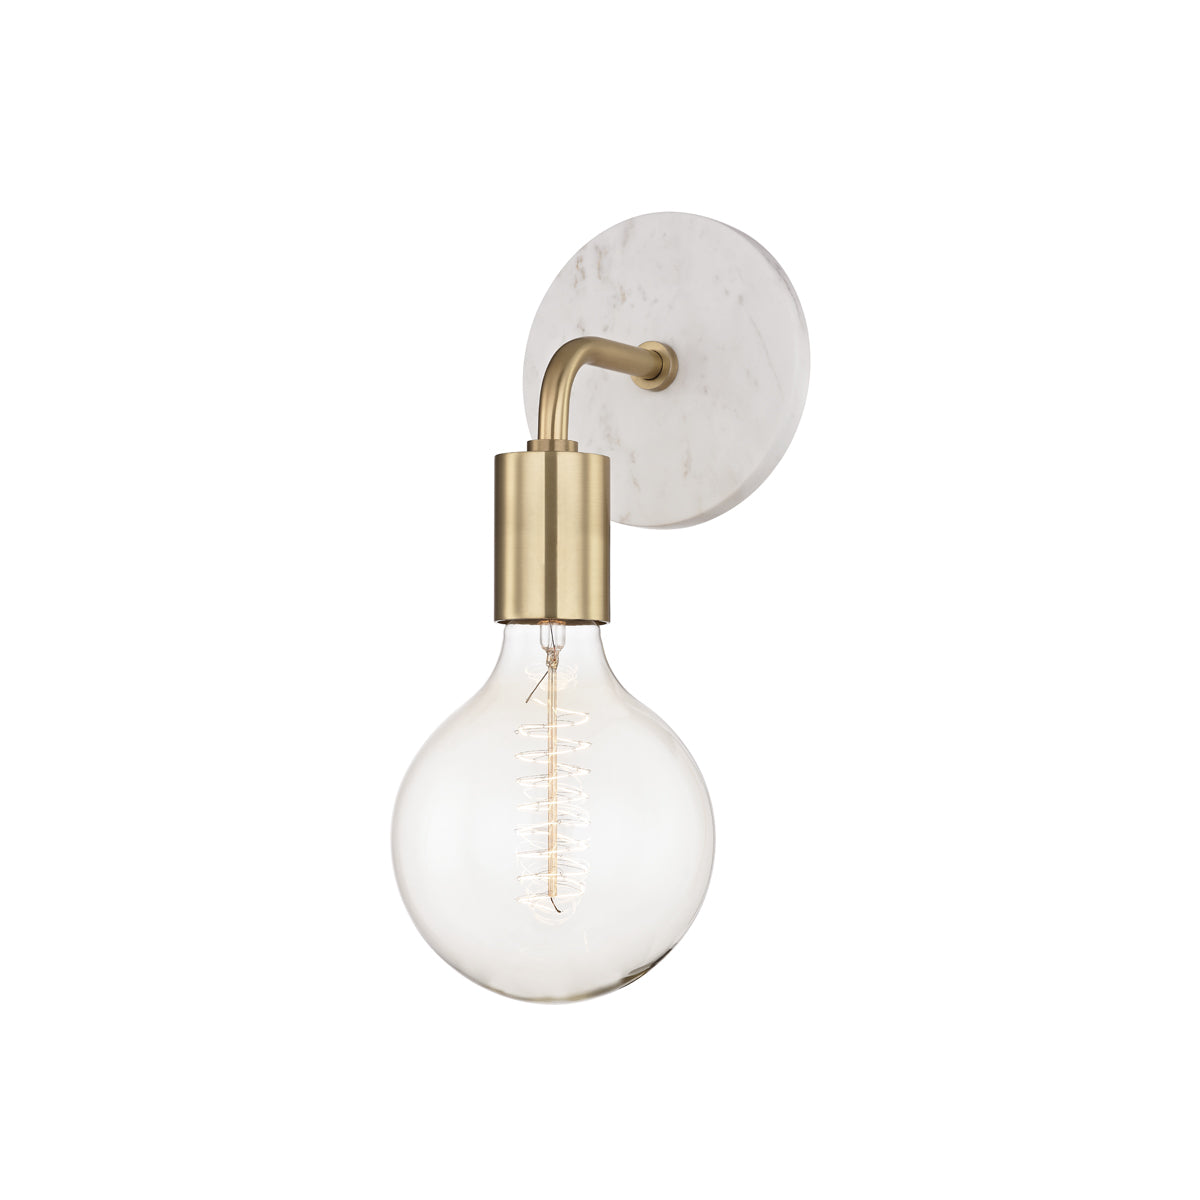 CHLOE Wall Sconce H110101A-AGB-CE Hudson Valley Lighting